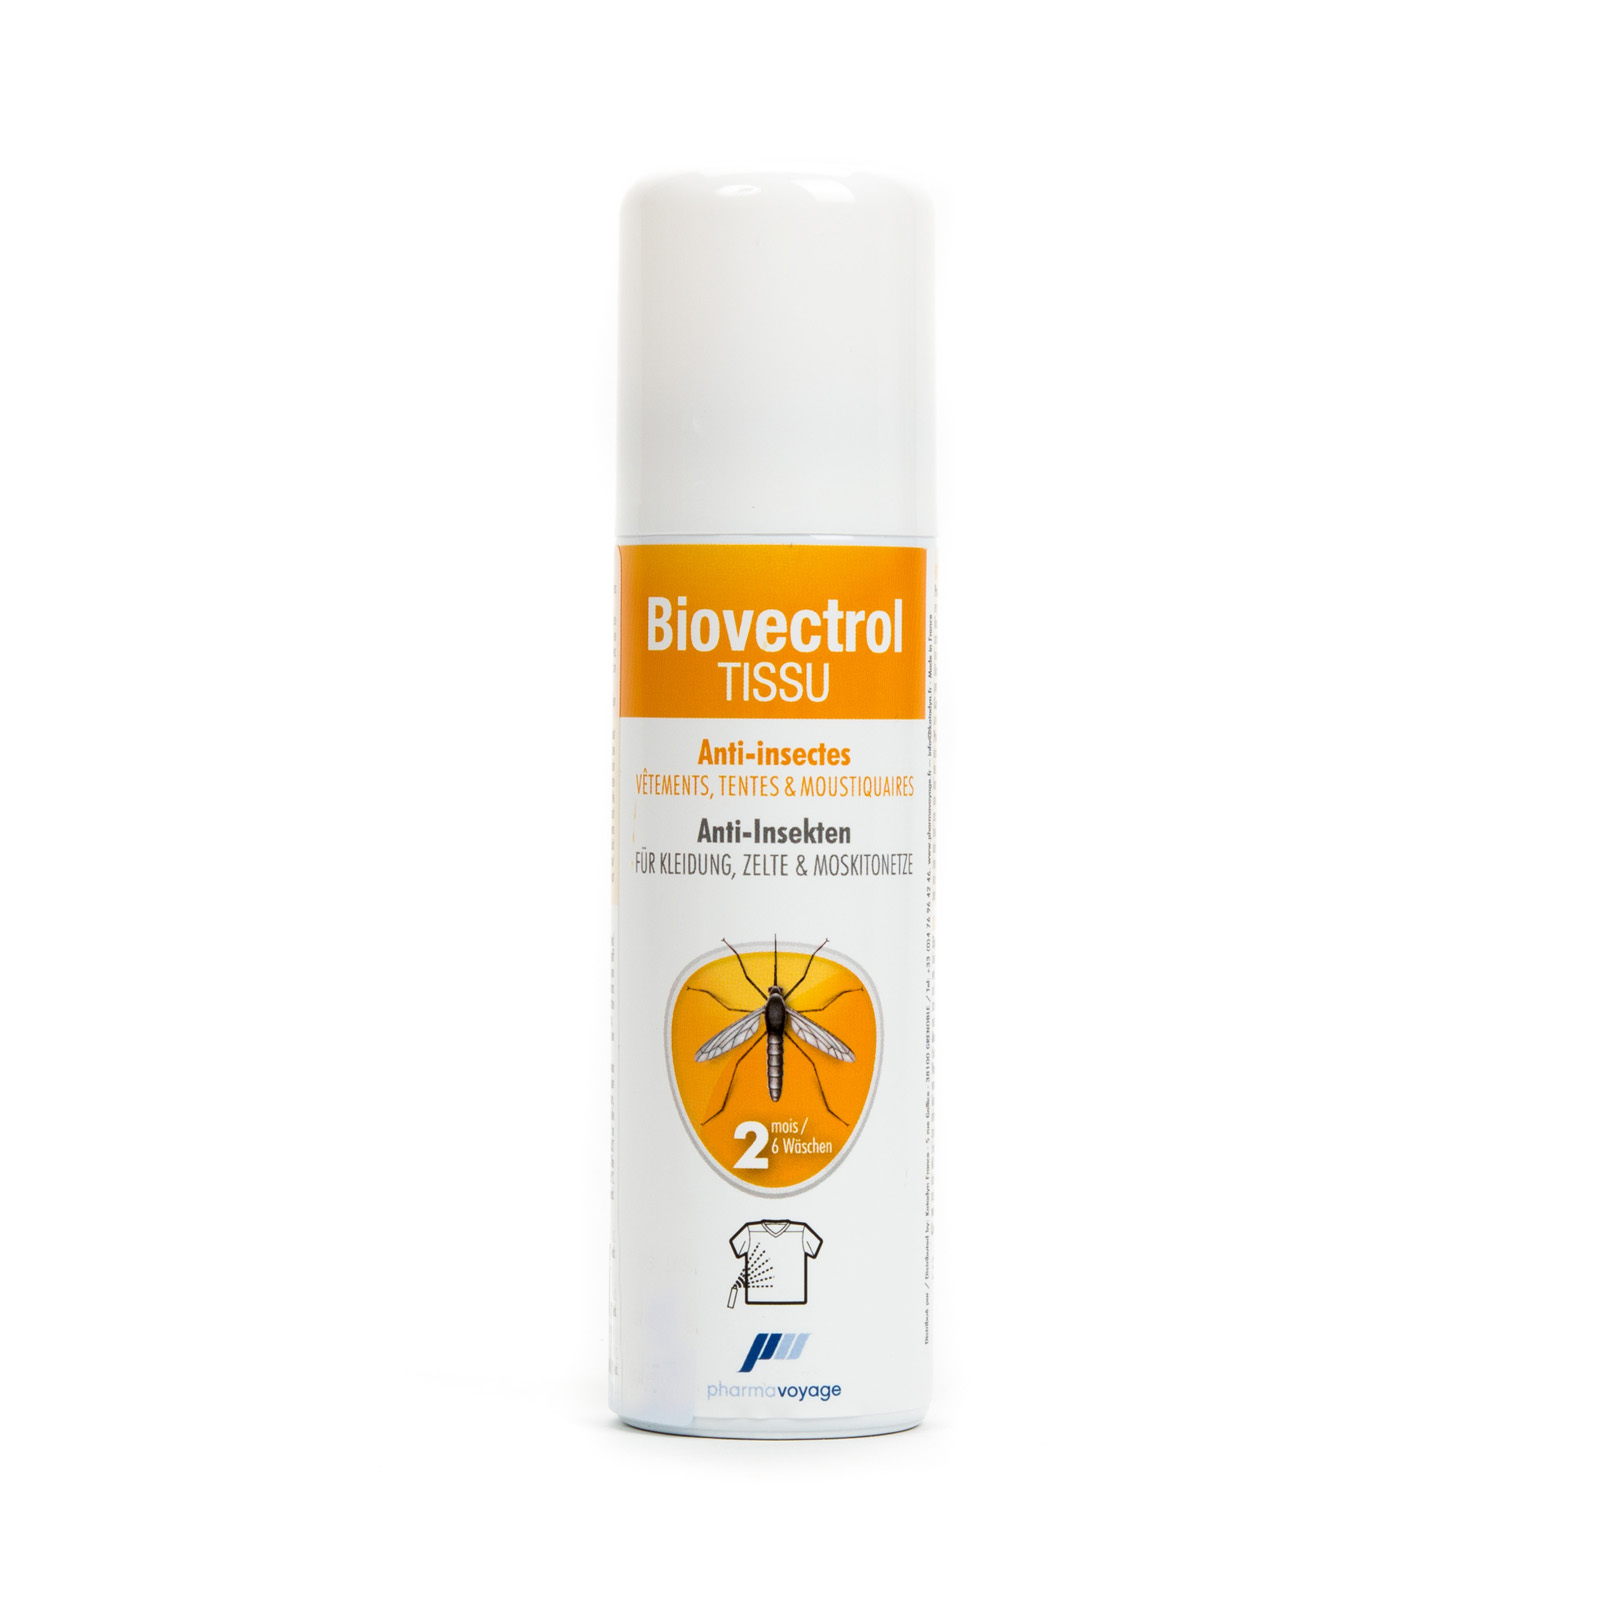 Biovectrol, spray anti-insectes spécial